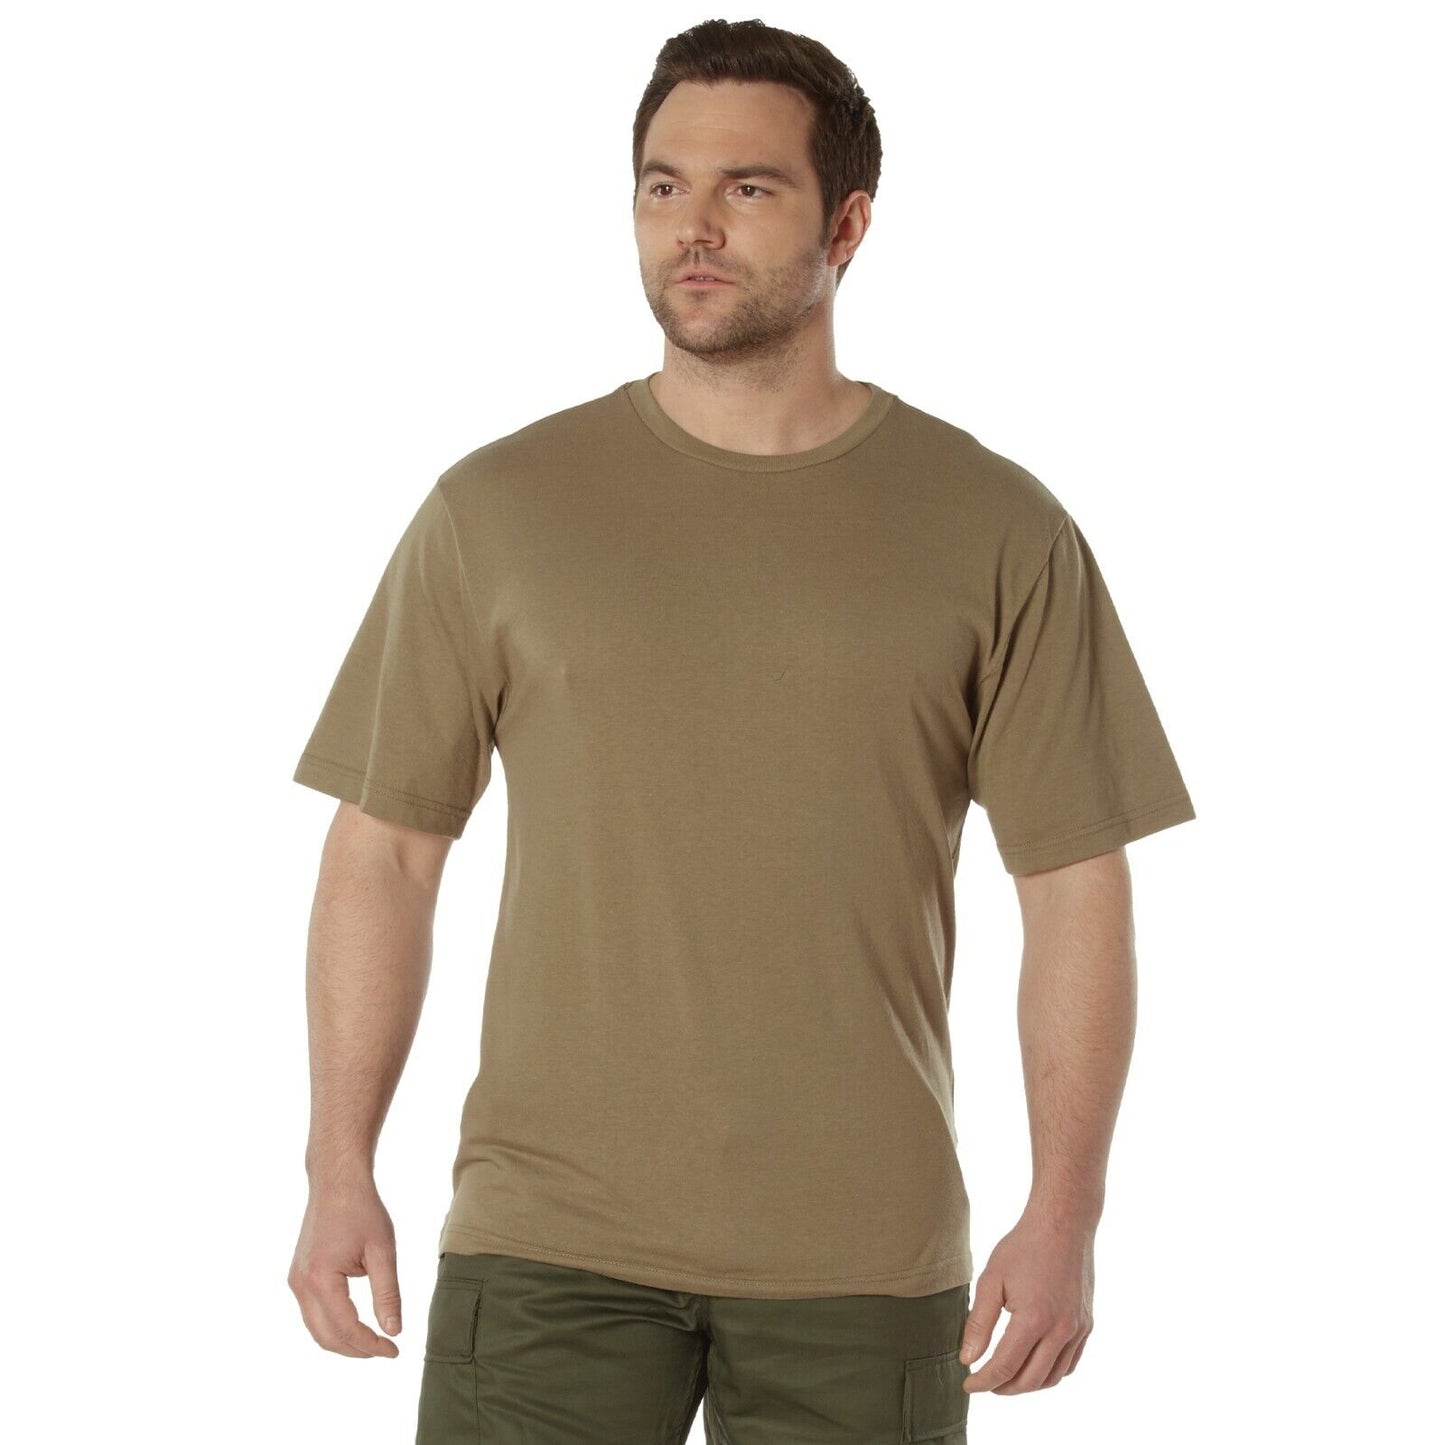 Rothco Full Comfort Fit T-Shirt Lightweight Poly/Cotton Men's Tee